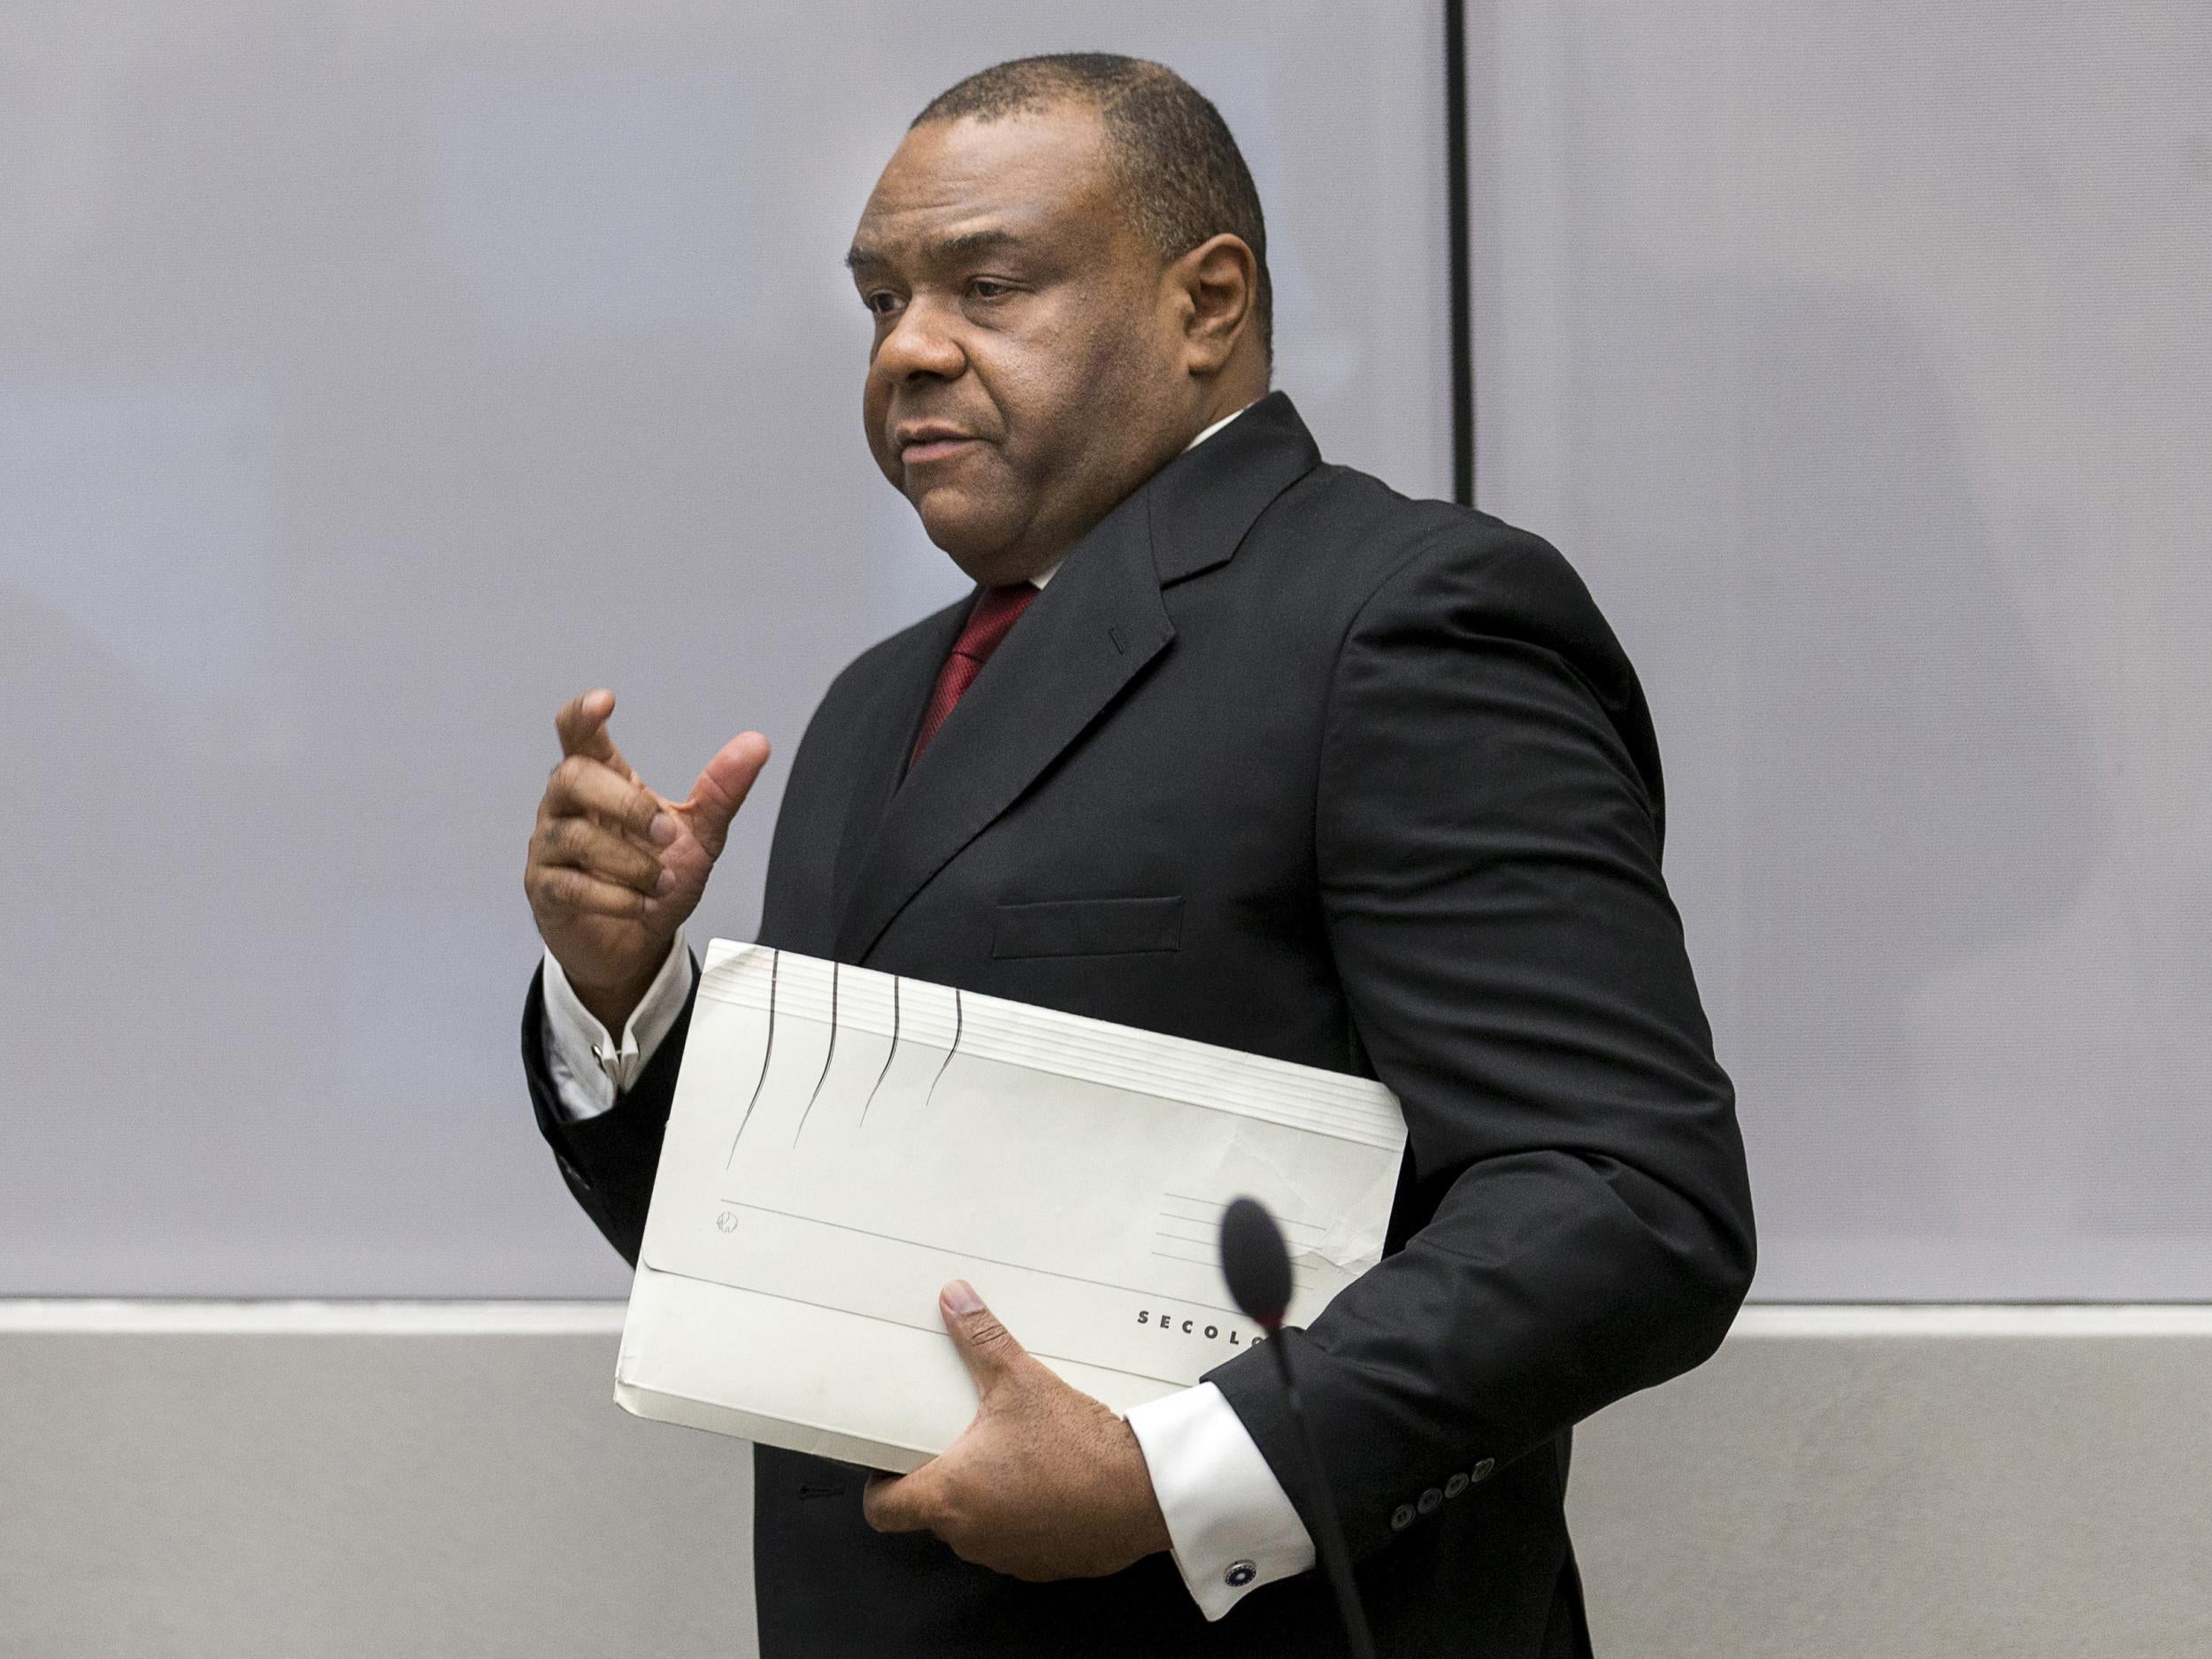 Image result for Former Congolese warlord Bemba seeking millions in damages from ICC